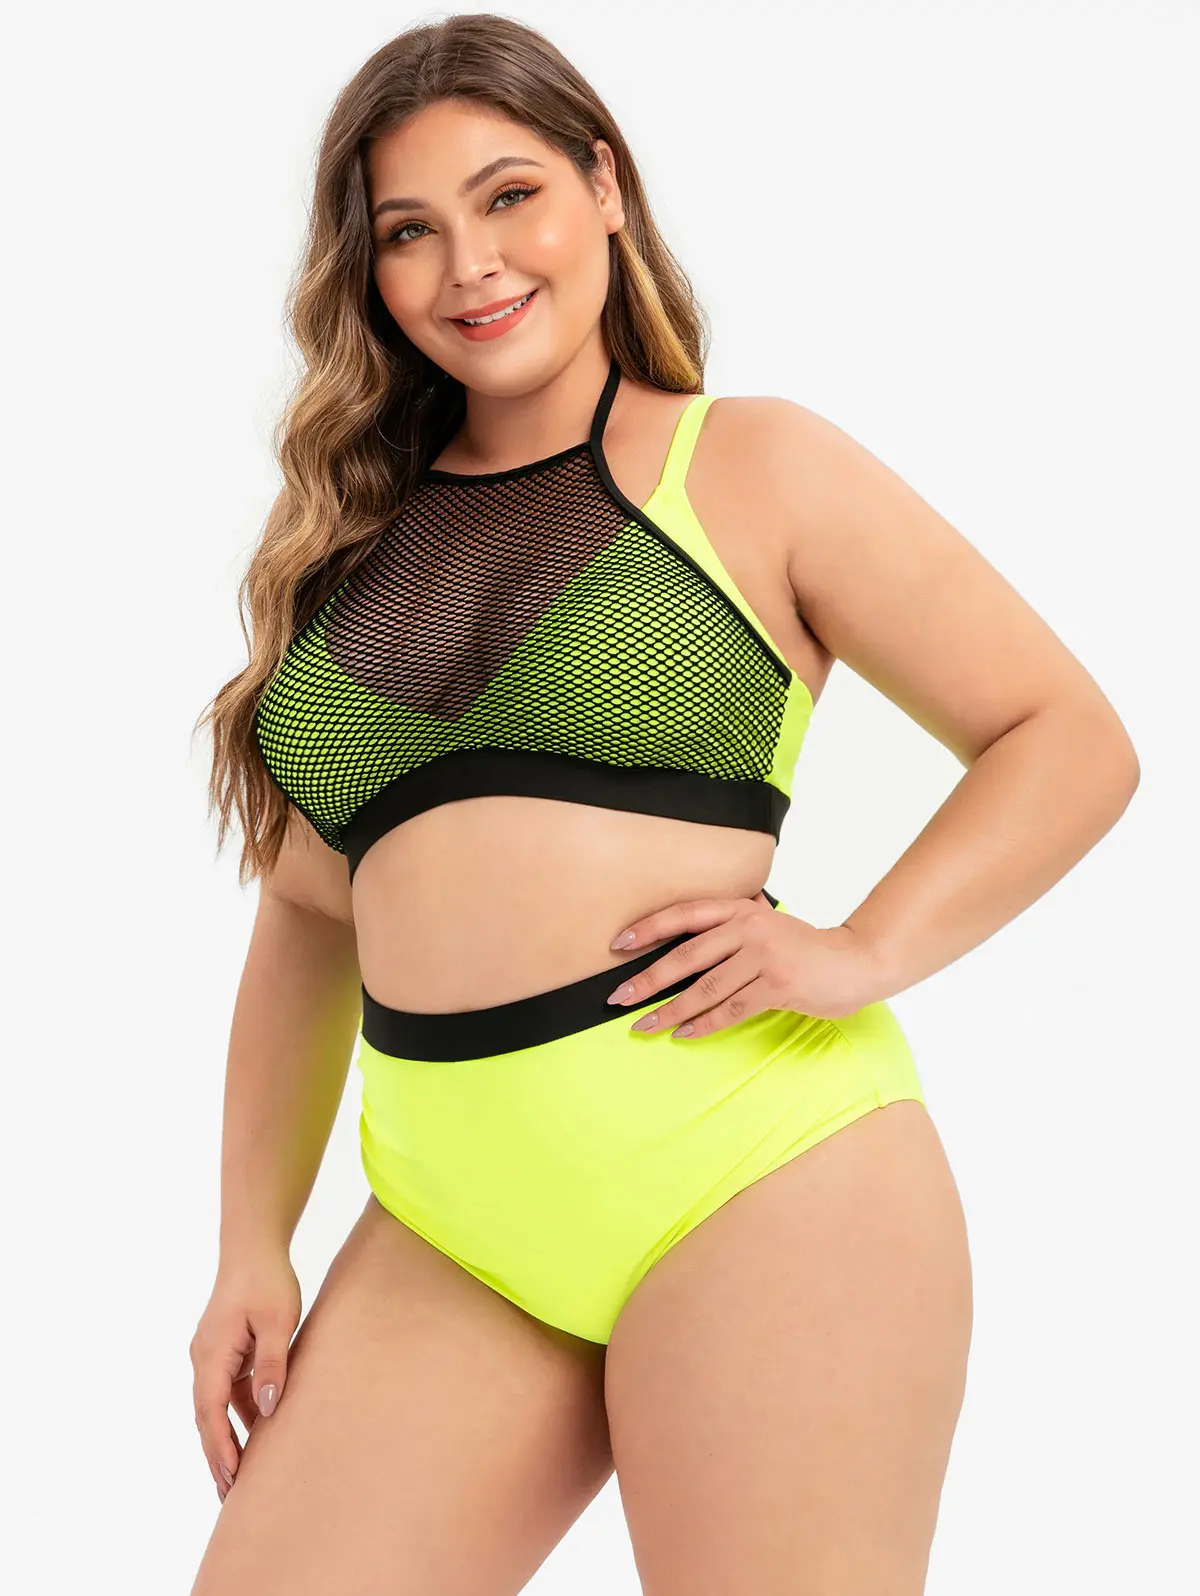 

Sexy Fishnet Overlay Plus Size Ruched Bikini Swimsuit High Waisted High Rise Neon Gather Cup Bikinis 2 Pieces Woman Swimsuit